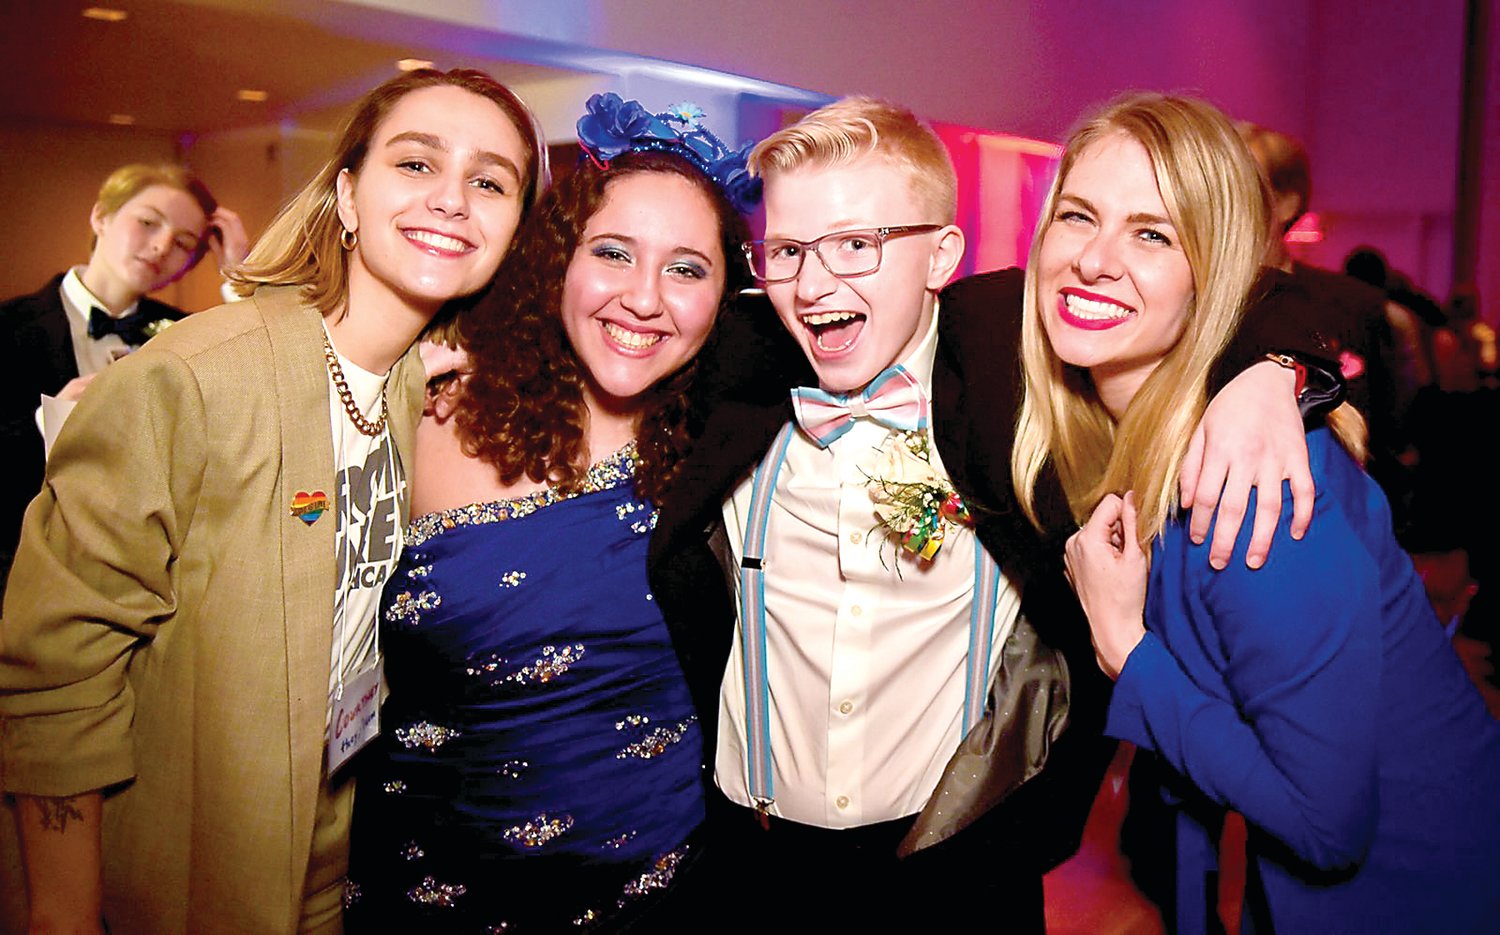 Teens from 57 schools danced at the Love is Love prom. Photograph by Raphael Duck Photography.